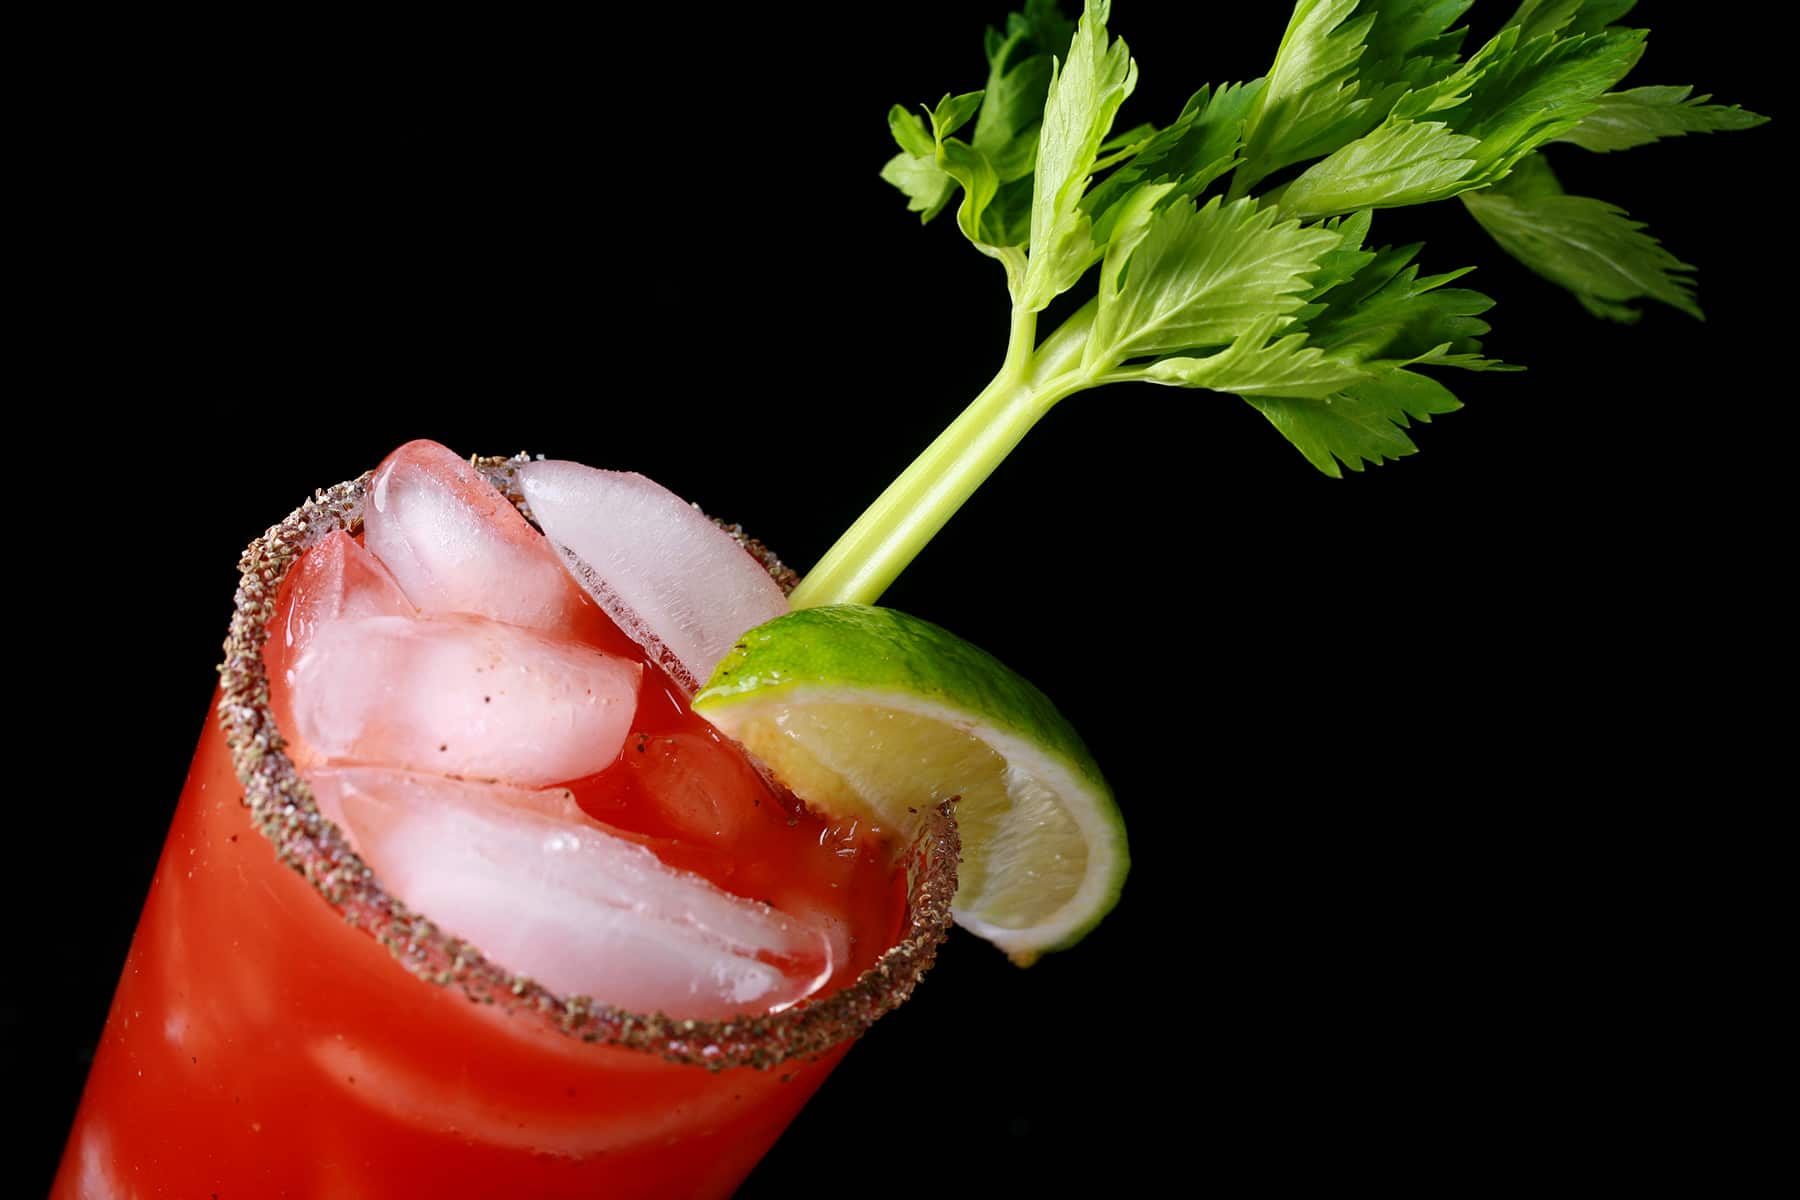 A Bloody Caesar, using homemade Clamato. A tomato based cocktail in a tall glass, with a celery stick and lime wedge as garnish.